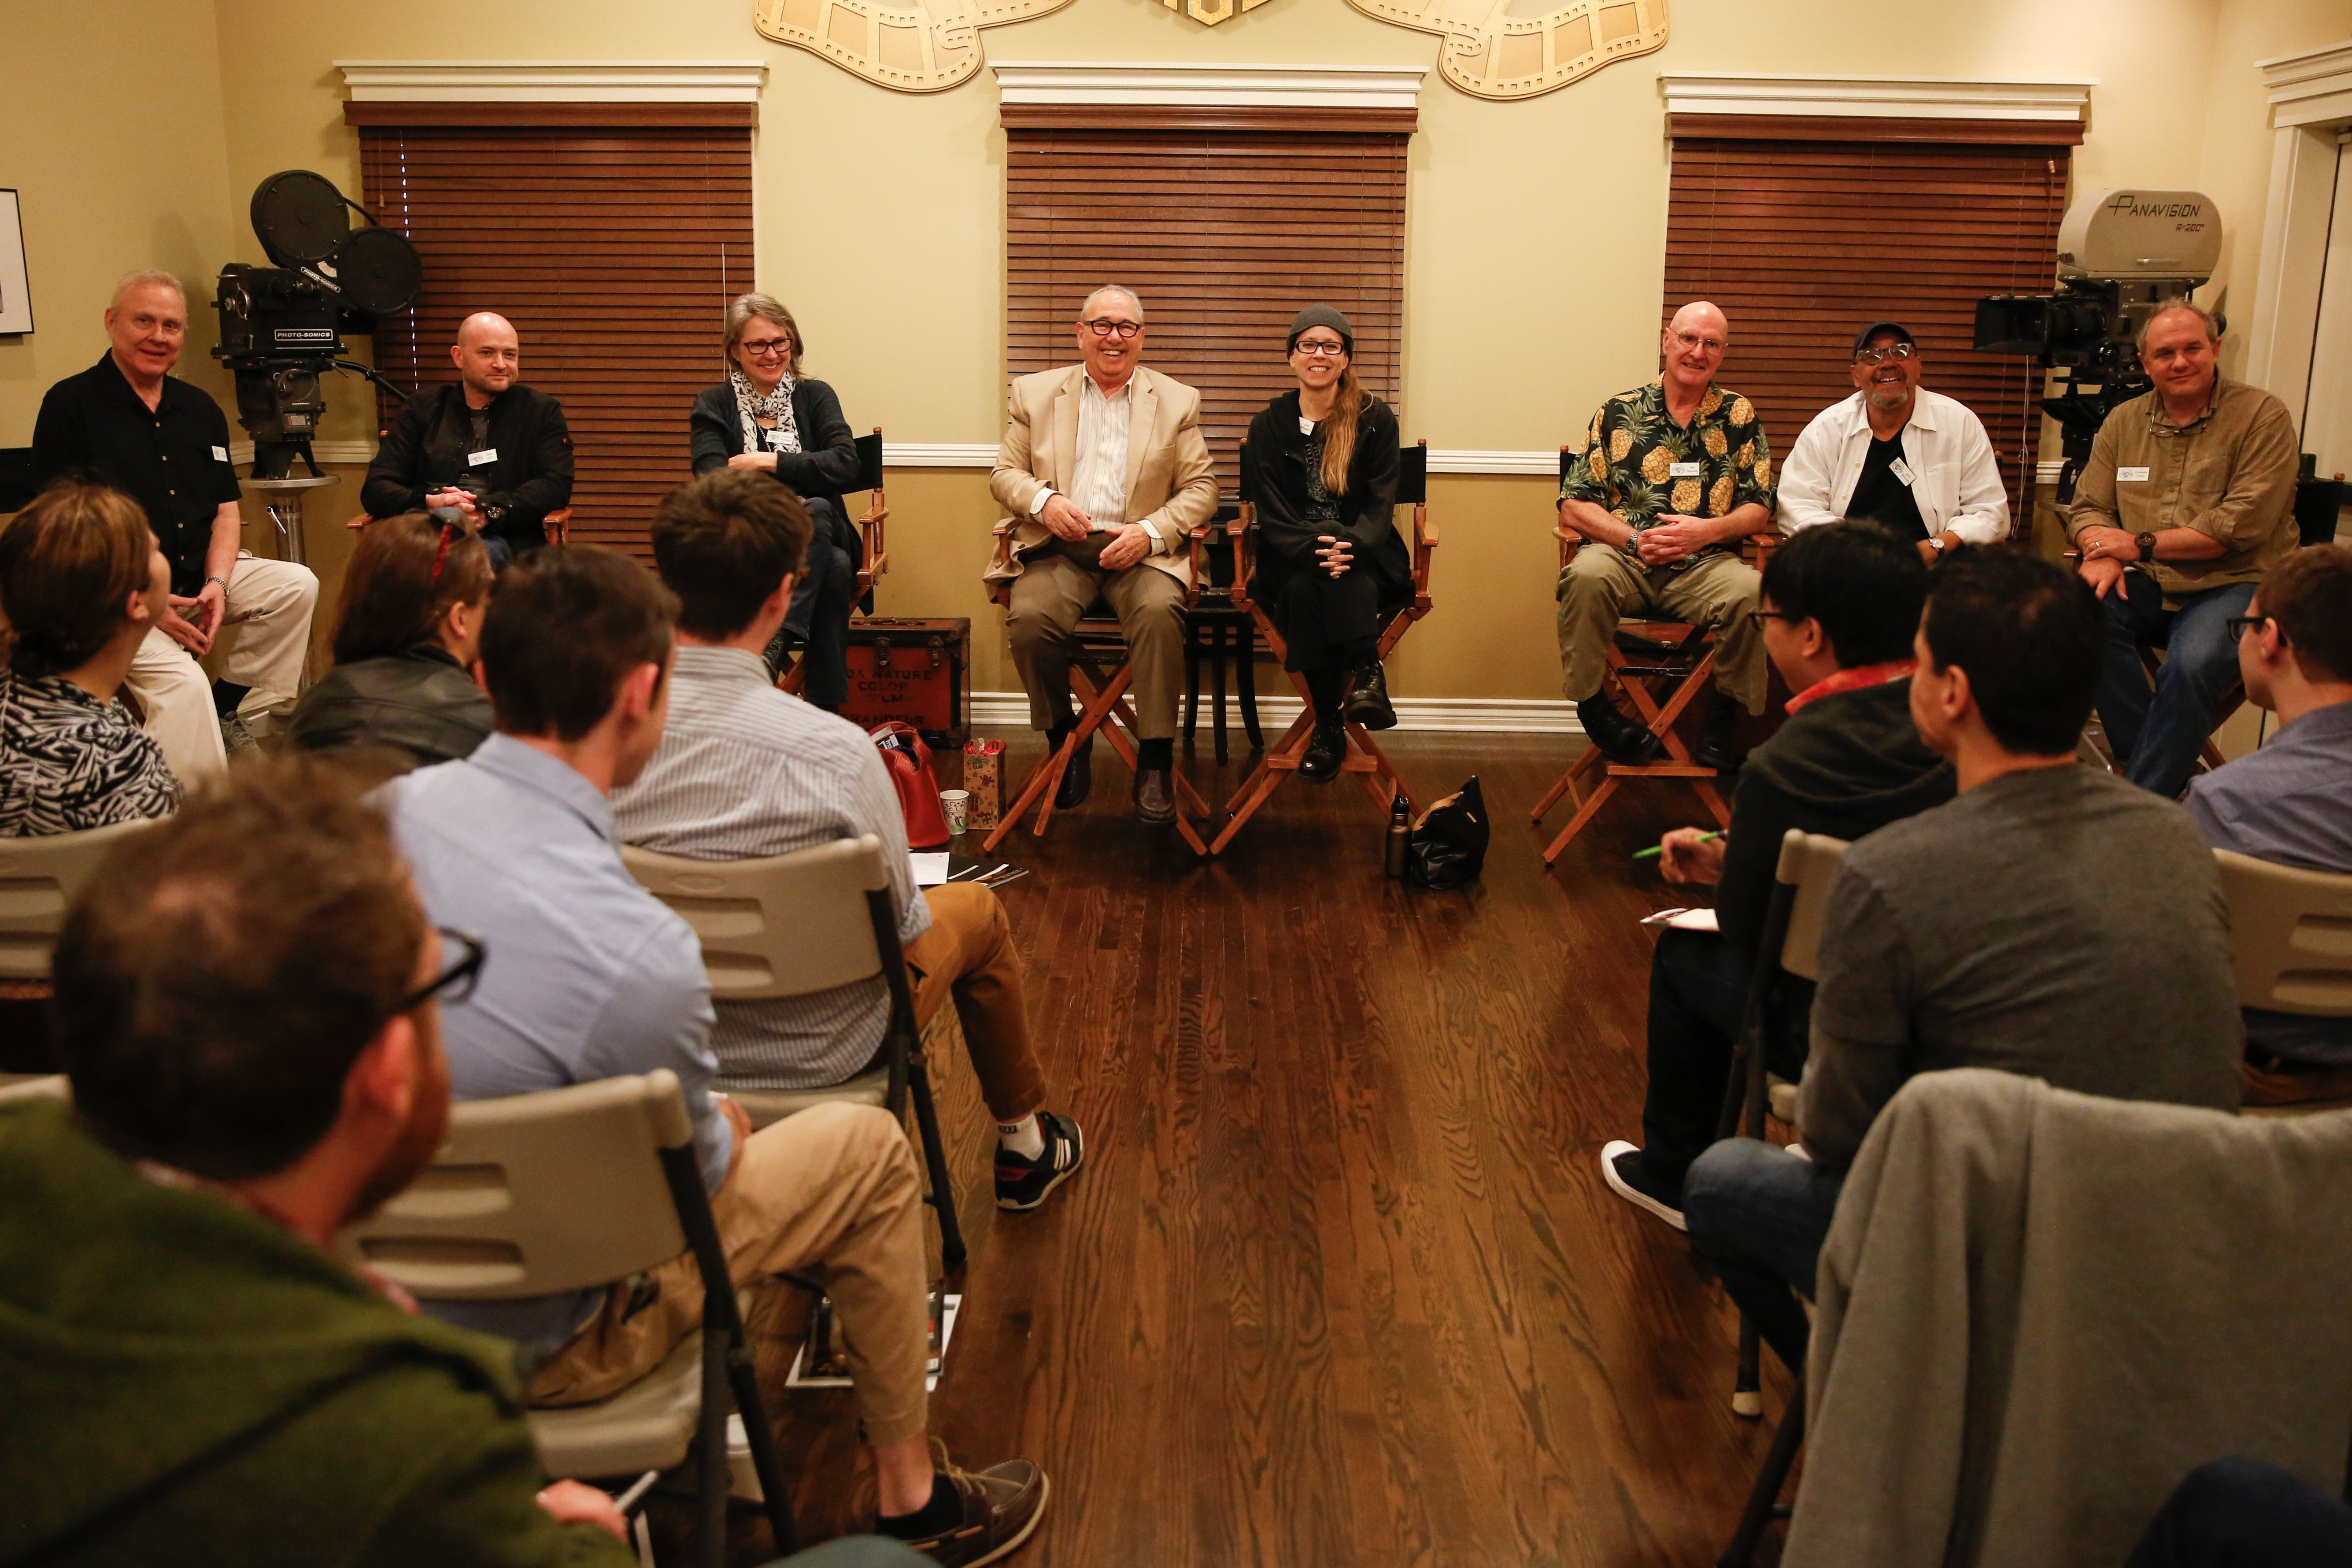 From left: ASC cinematographers Don McCuaig, David Klein, Cynthia Pusheck, George Spiro Dibie, Lisa Wiegand, Bill Bennett, John Simmons and Chris Chomyn field questions from students from the Rochester Institute of Technology. (Alex Beatty/ASC)